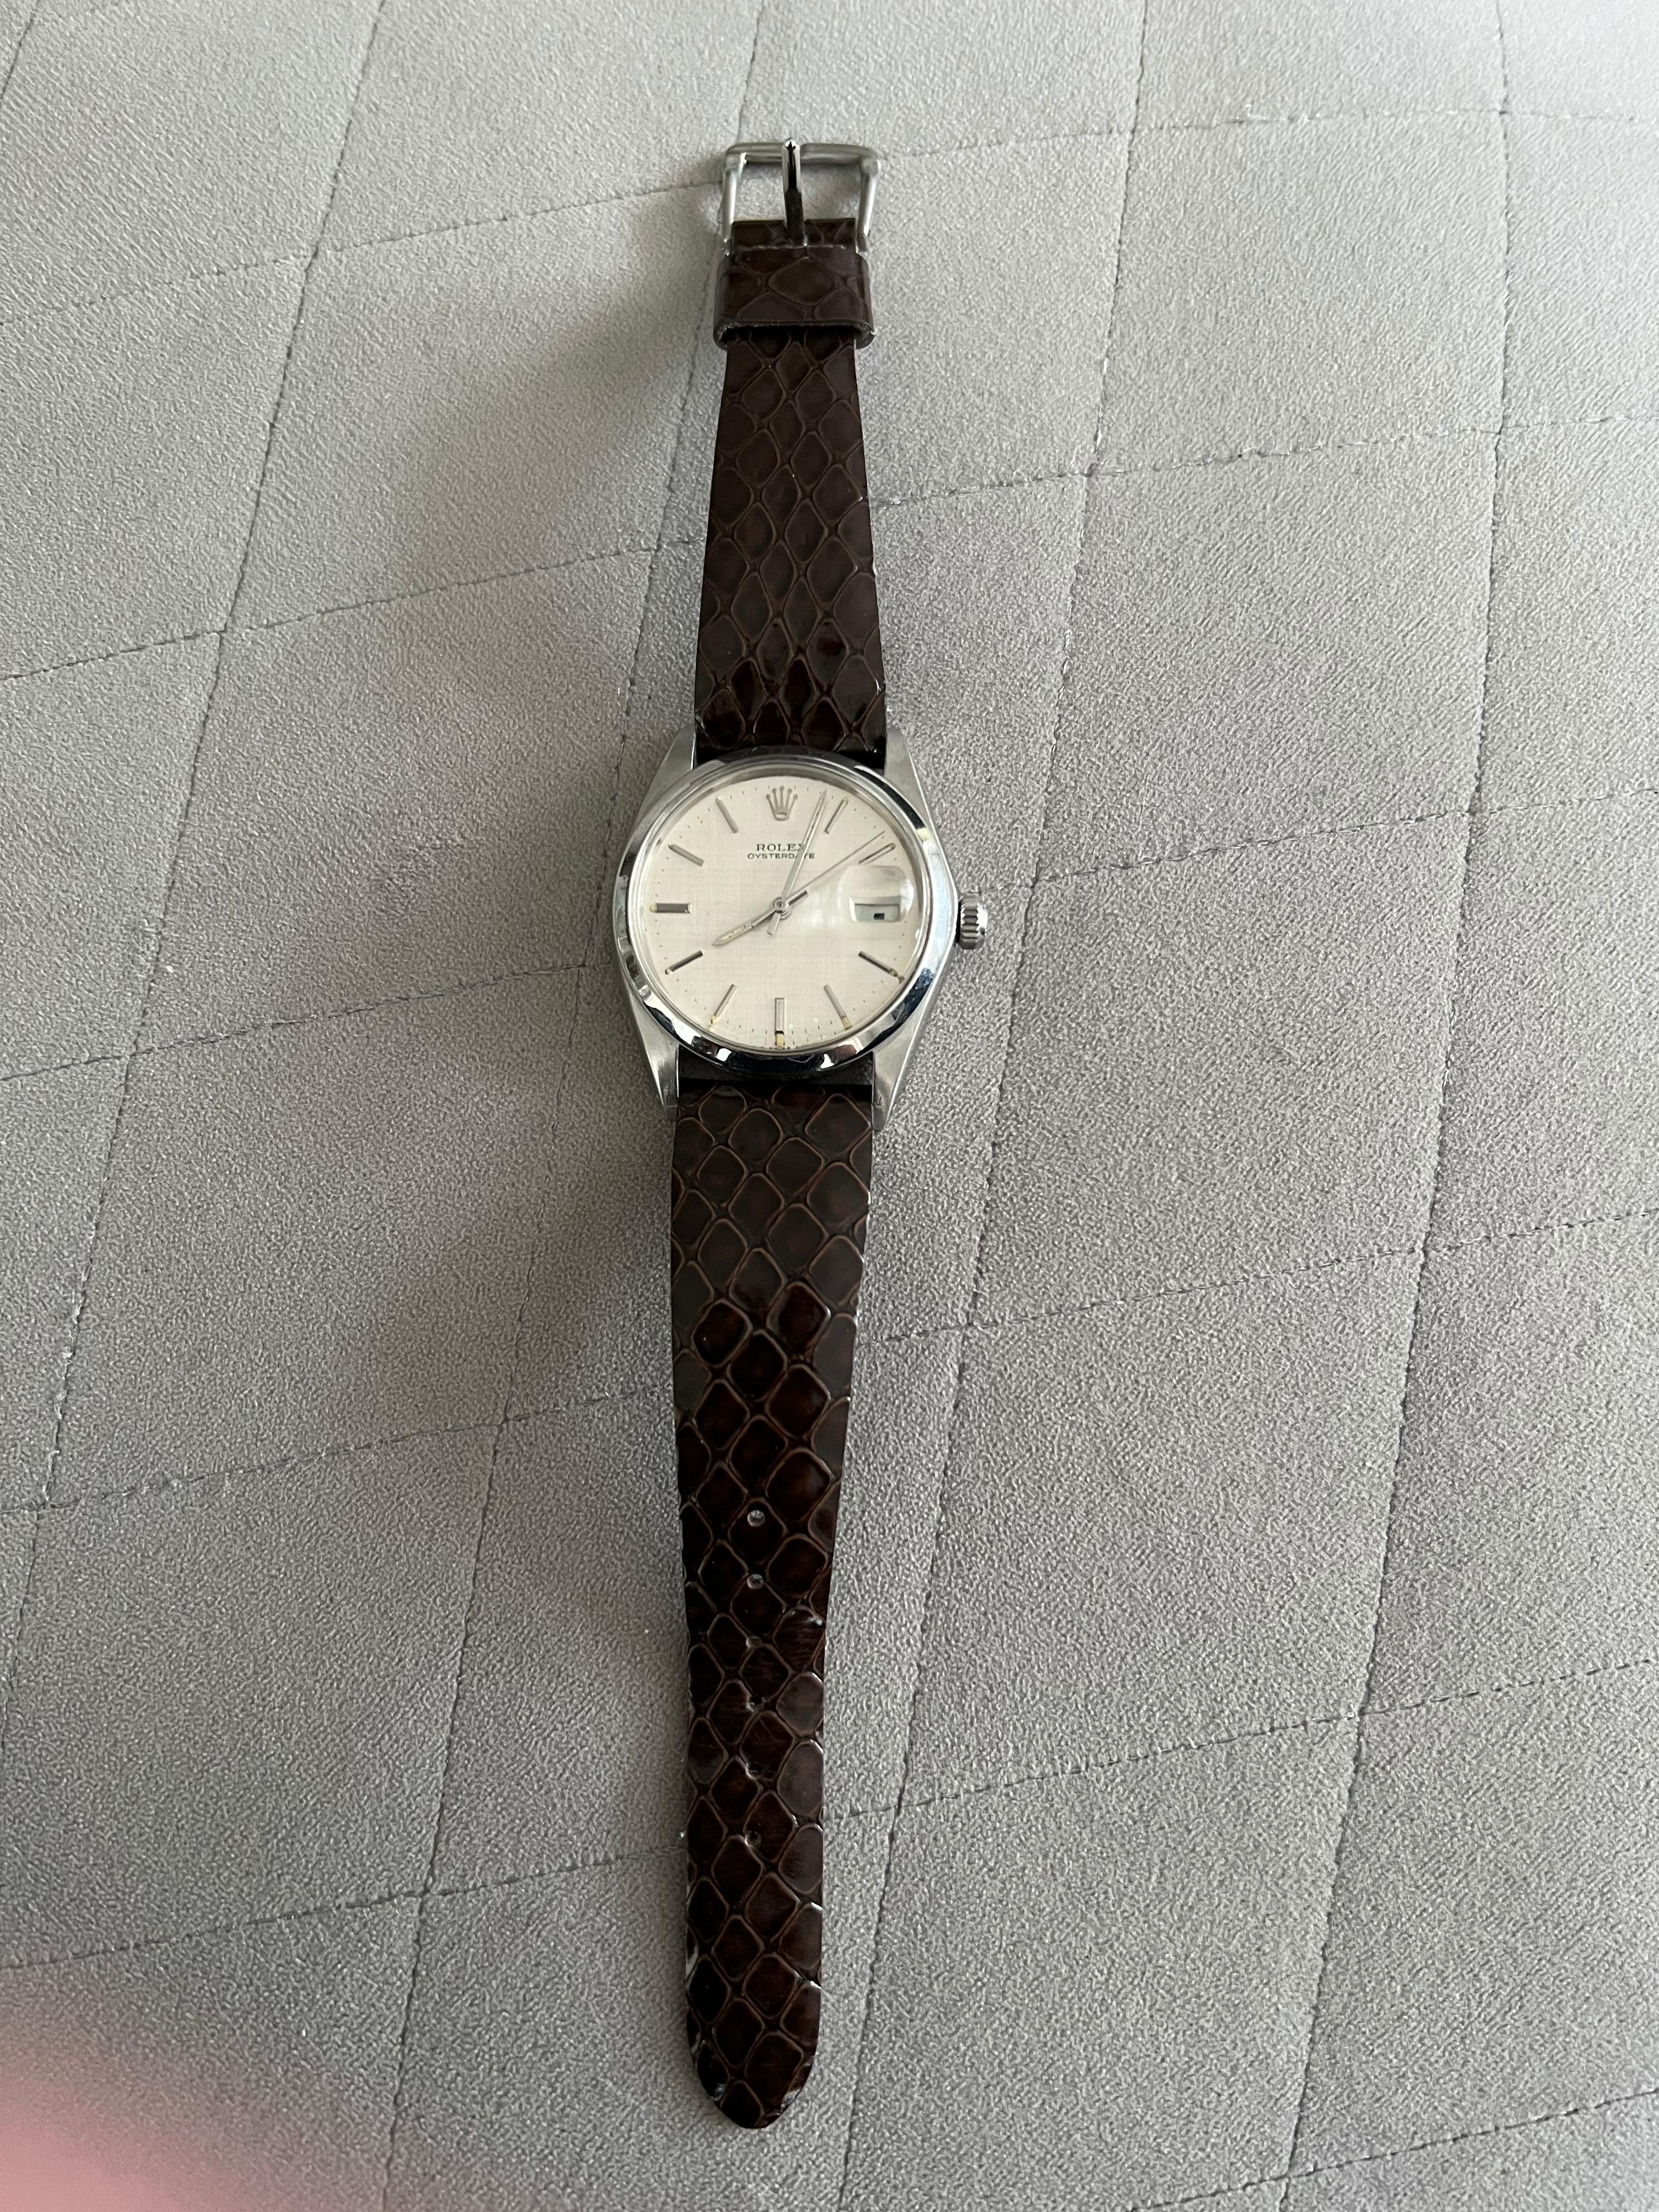 Mens Rolex Oyster-date Precision Hand-Wind 1970s Vintage In mint condition. 
Chocolate vintage lather strap. 
Rare clean face 
White clean dial as good a new
Simple, clean classic and chic
Luminous 
In perfect working condition 
Comes with a green